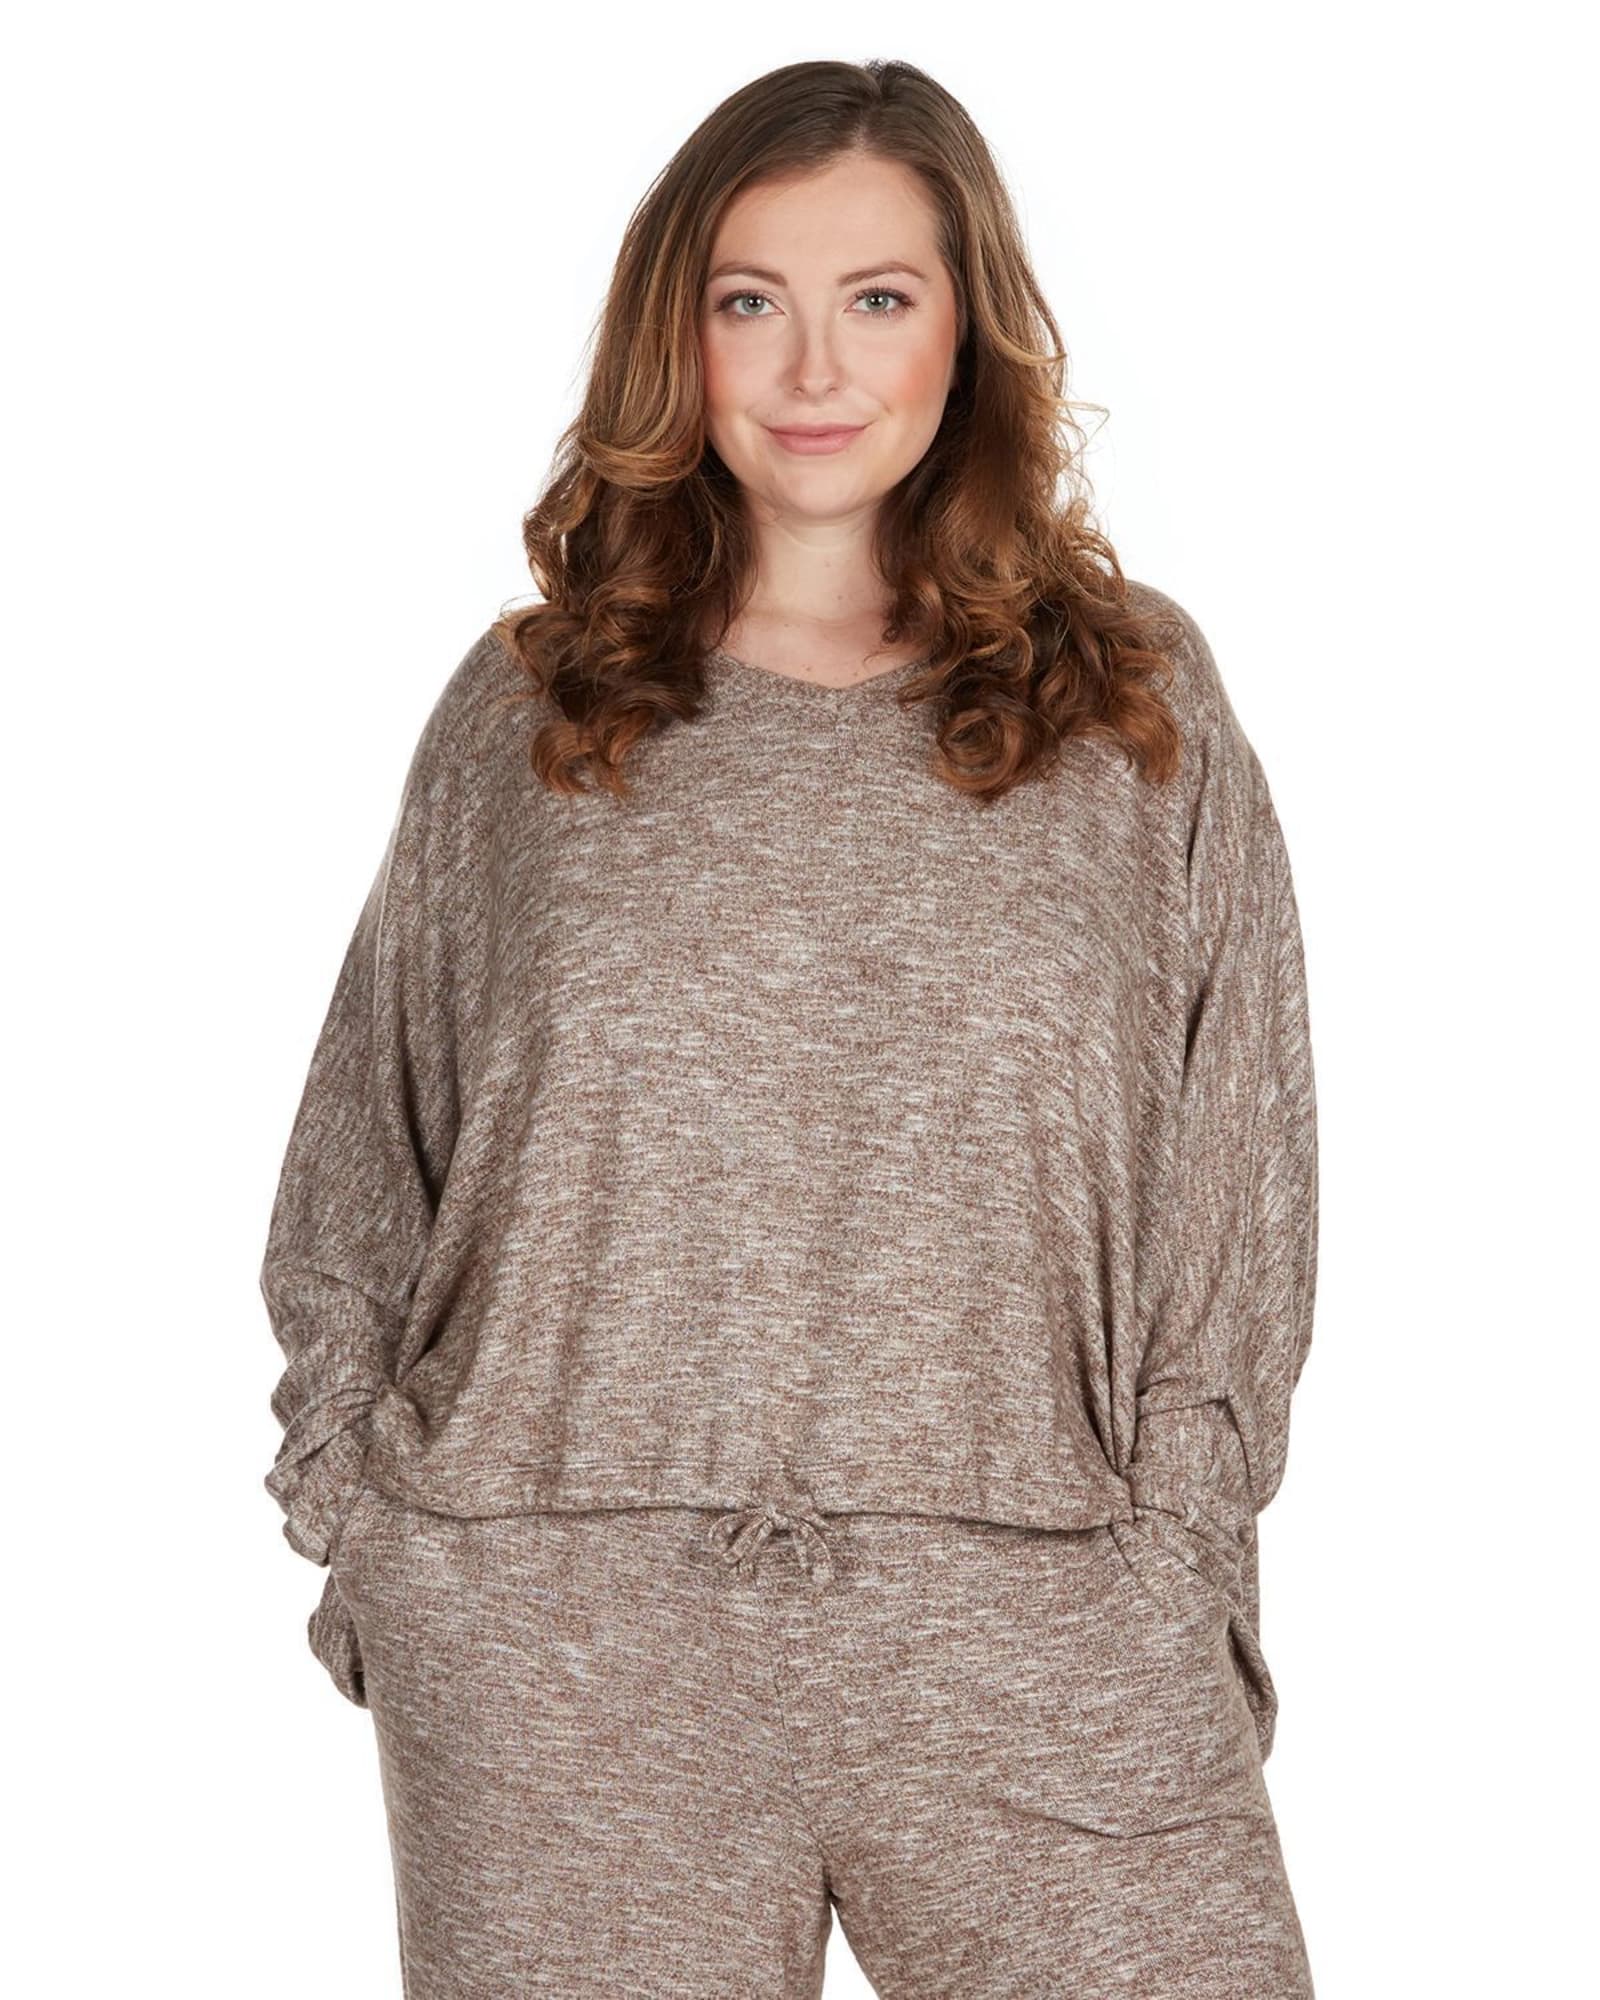 Women's Supersoft Hacci Lounge Pull Over Loose Fit Top | Pebble Brown